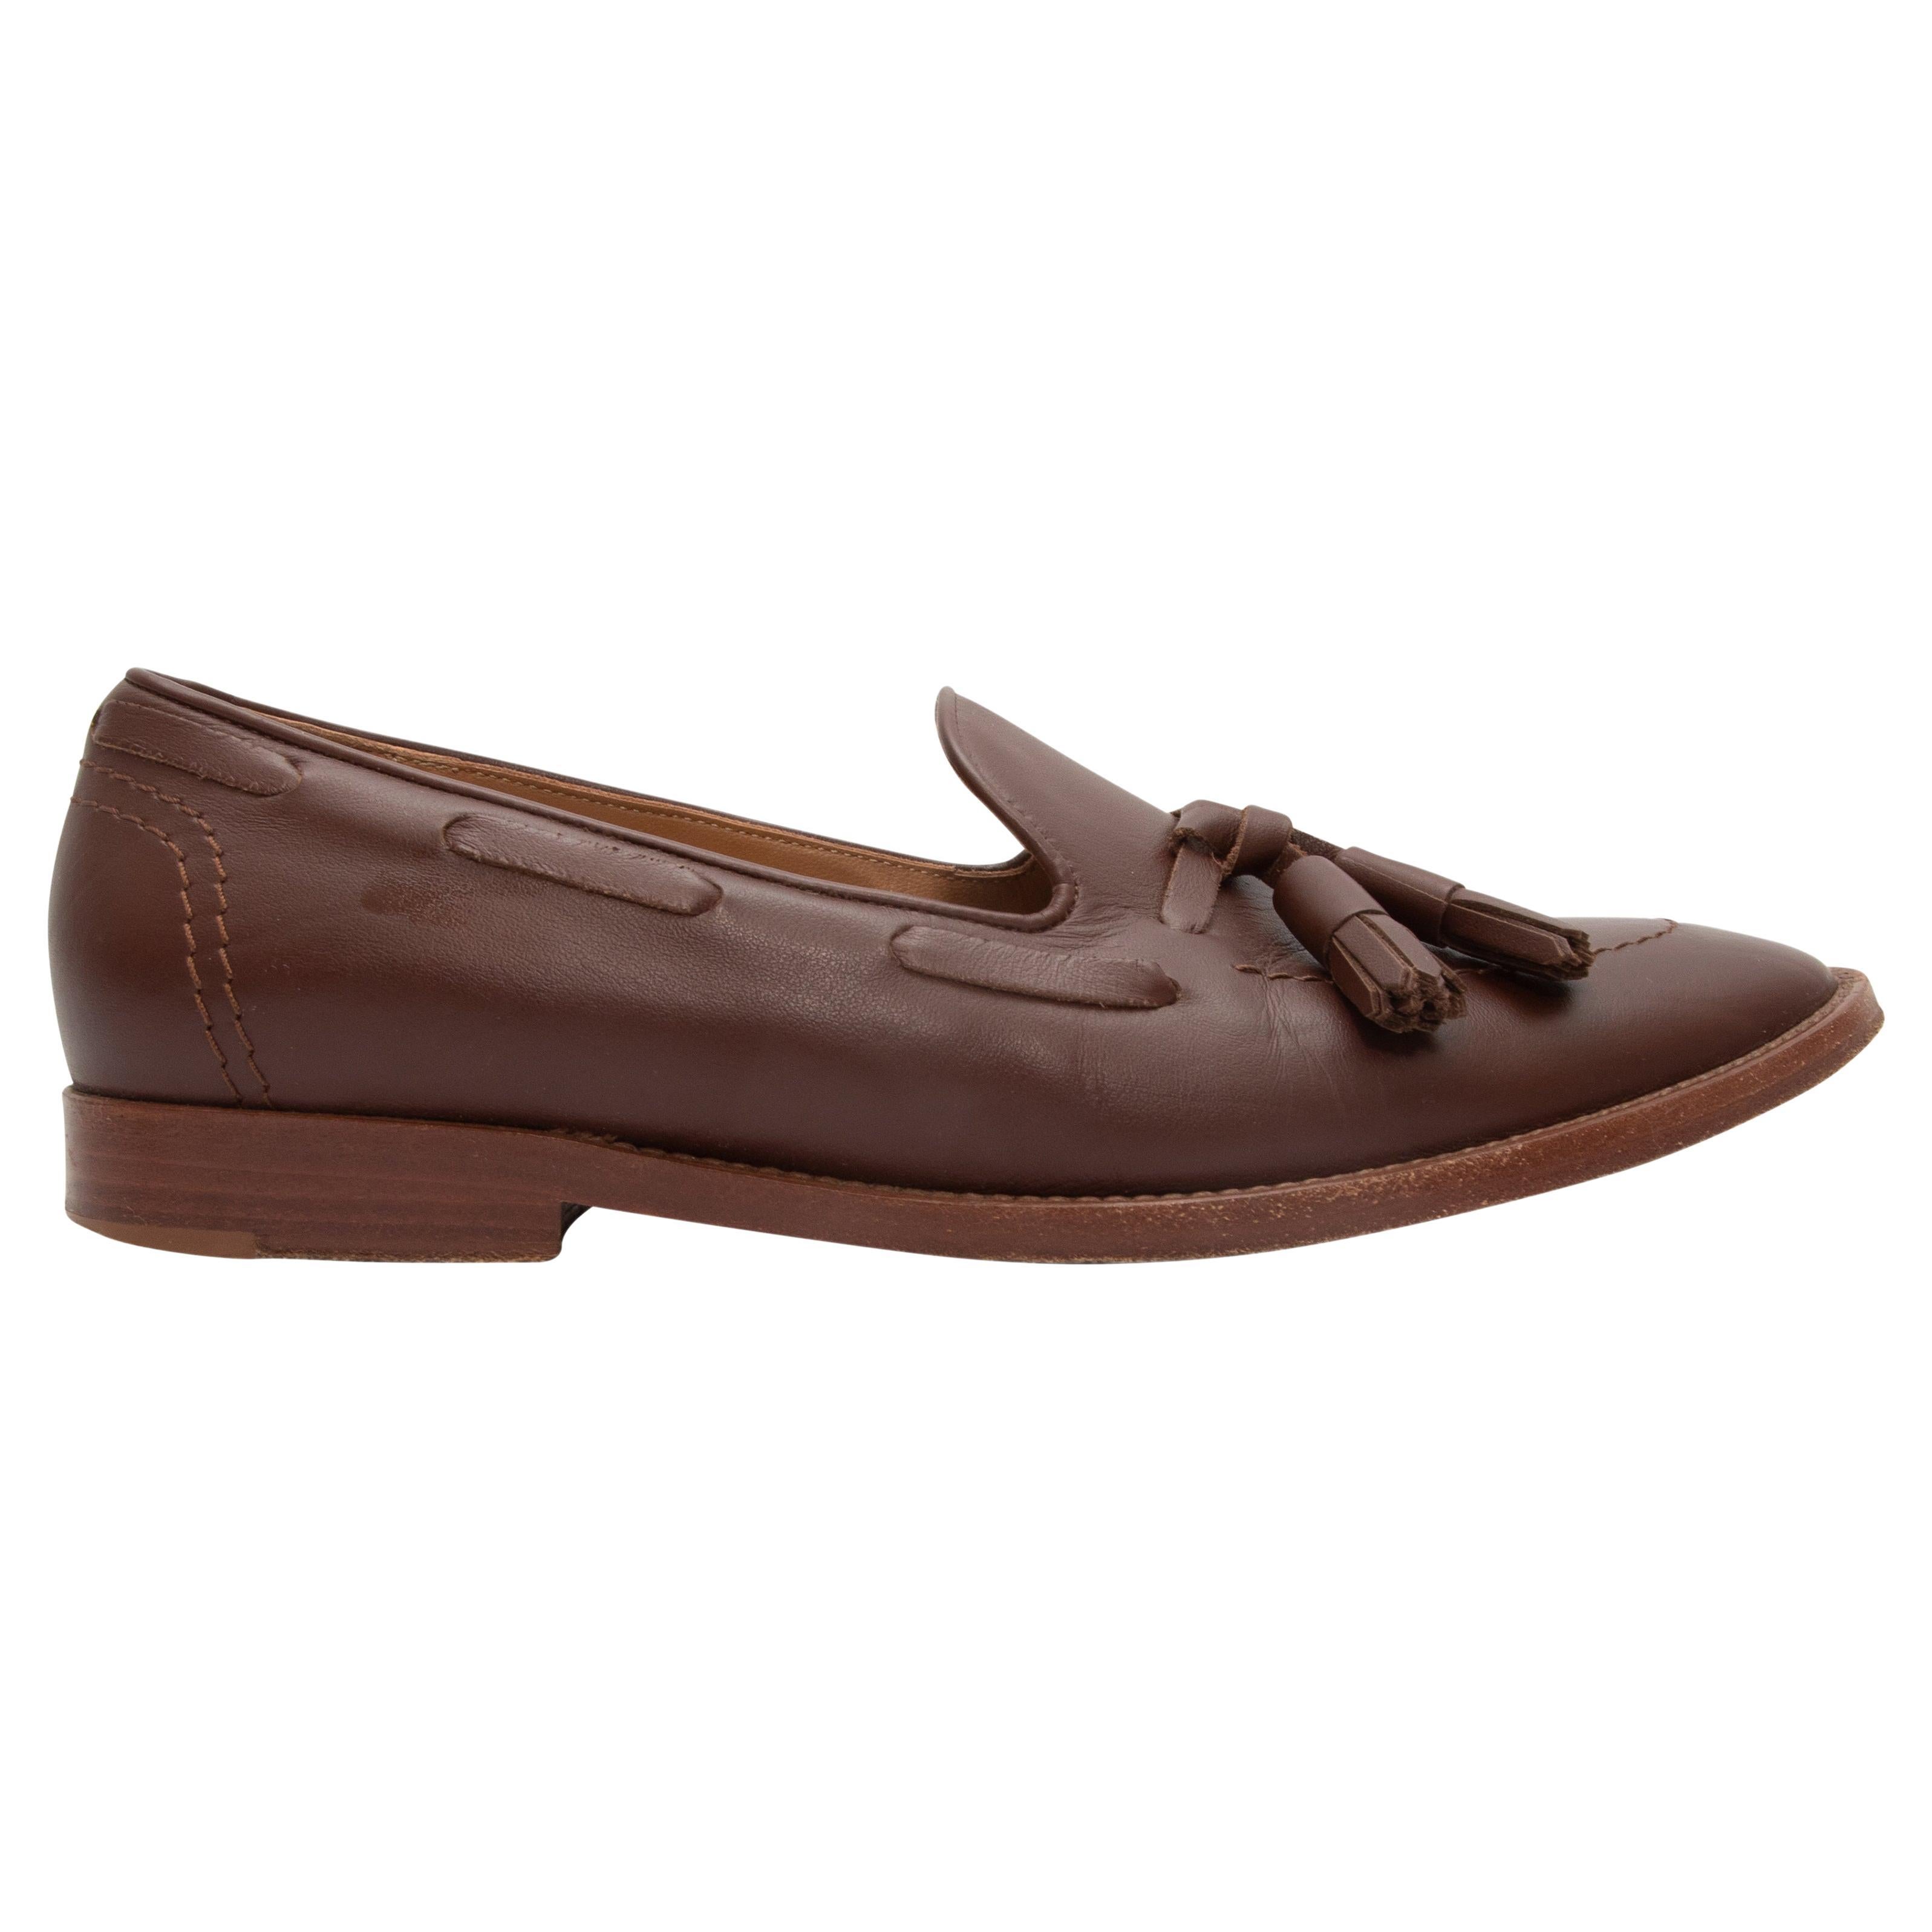 Mansur Gavriel Brown Leather Loafers With Tassel Size 7 For Sale